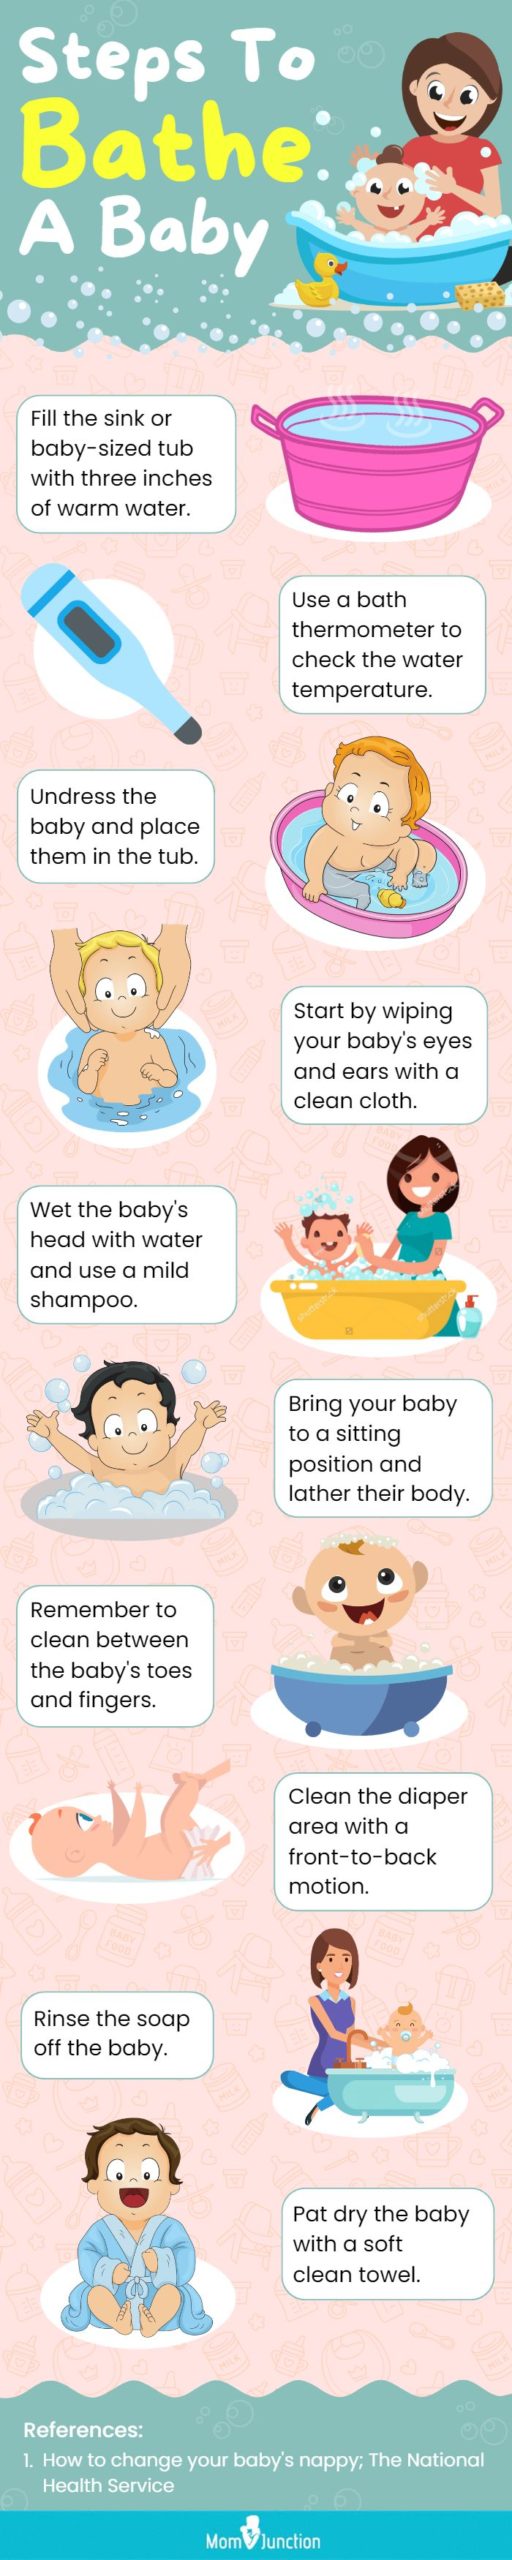 https://www.momjunction.com/wp-content/uploads/2020/04/Infographic-How-To-Bathe-A-Baby-scaled.jpg